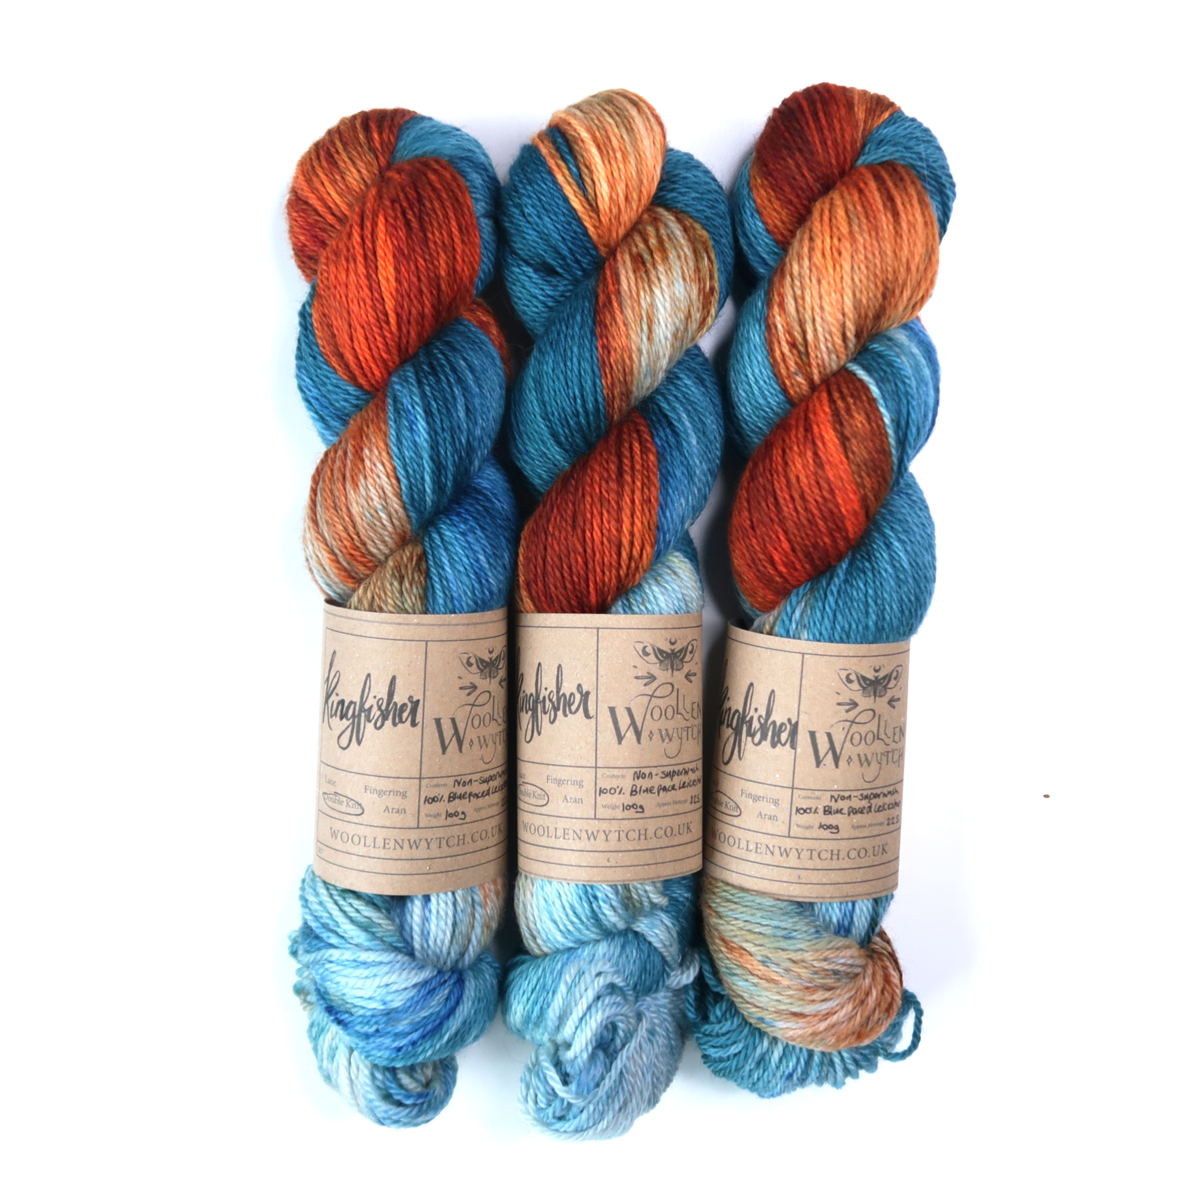 Kingfisher inspired hand dyed yarn using oranges and blue by Woollen Wytch